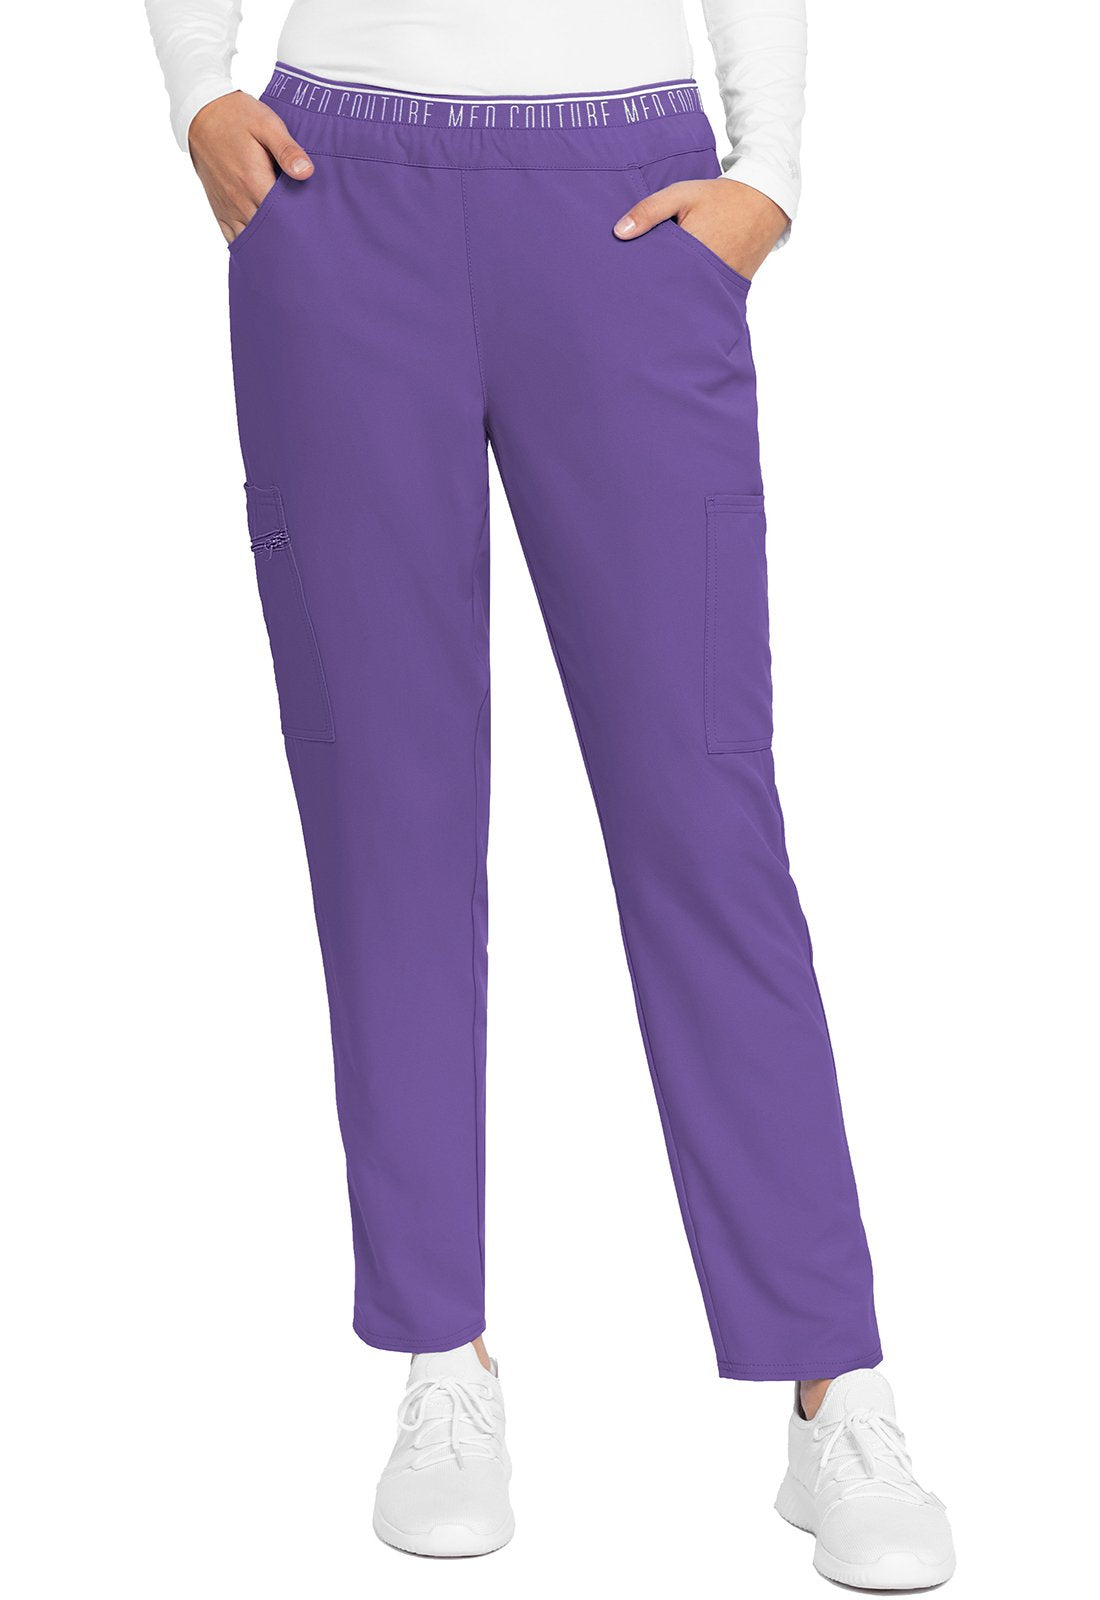 Med Couture MC Insight Gumdrop / 3XL MC Insight  Mid-rise Tapered Leg Pull-on Pant MC009